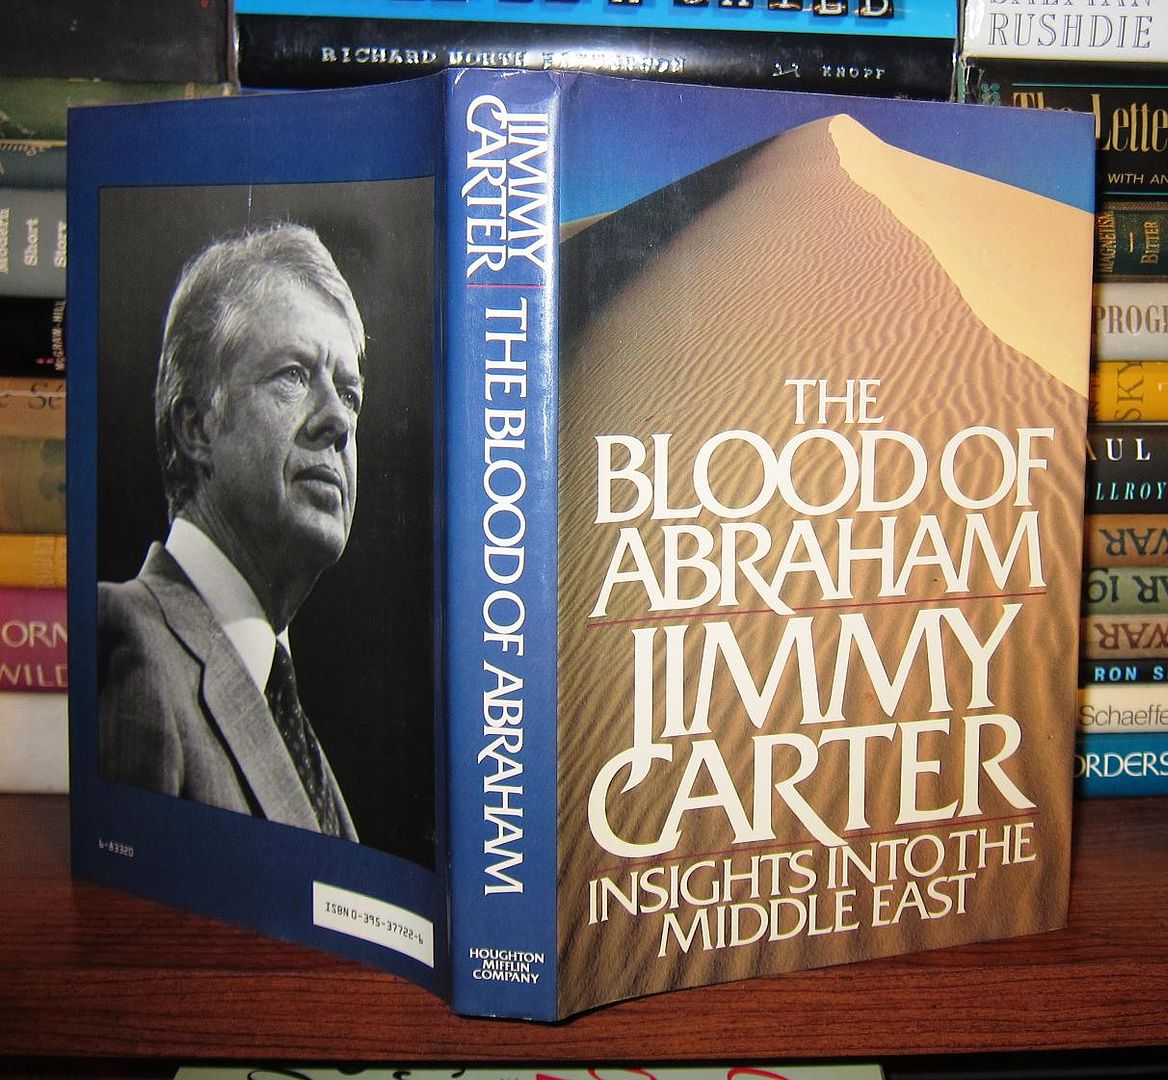 CARTER, JIMMY - The Blood of Abraham Insights Into the Middle East